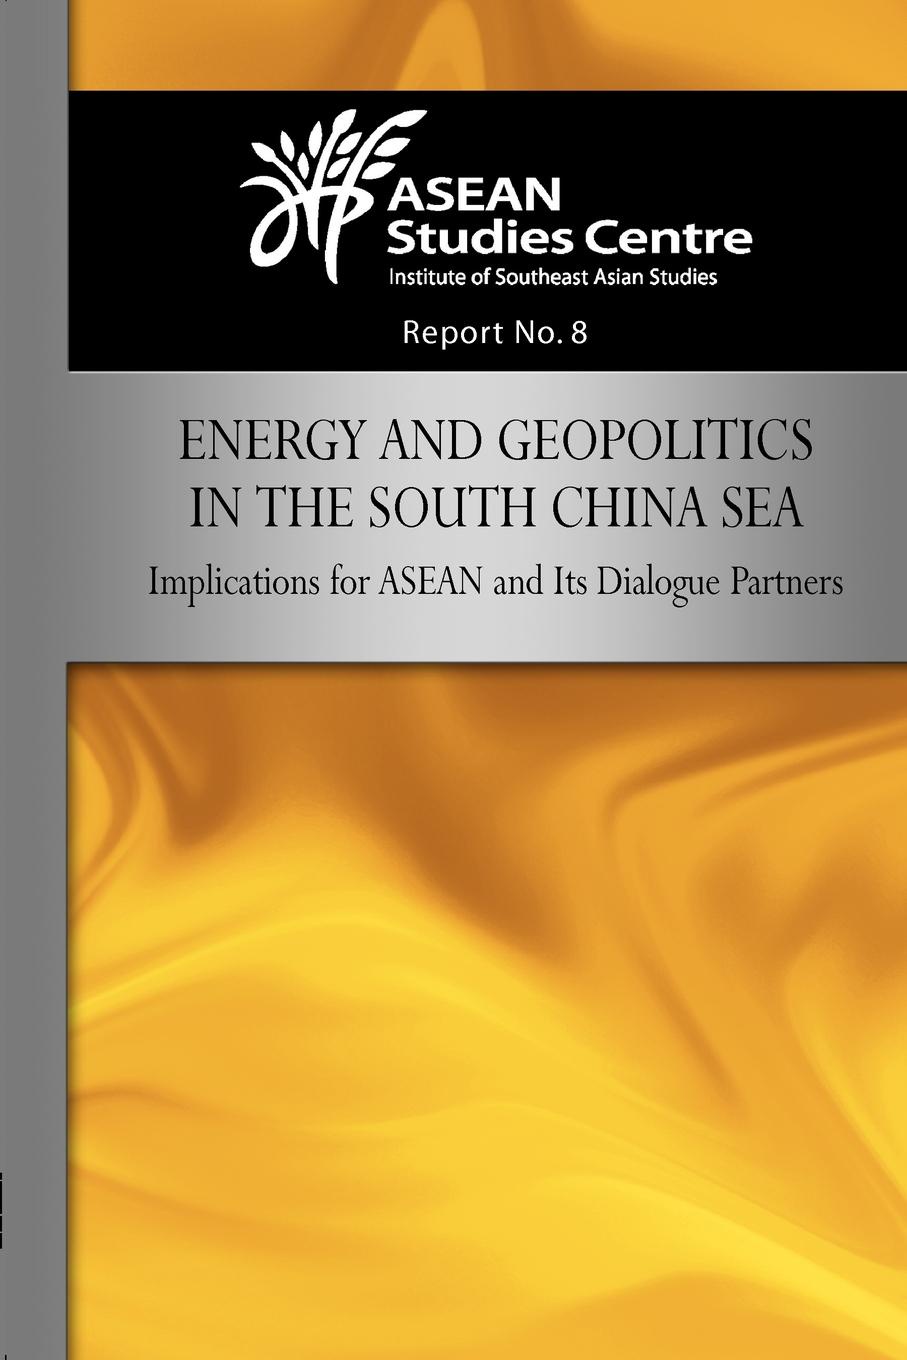 Energy and Geopolitics in the South China Sea. Implications for ASEAN and Its Dialogue Partners